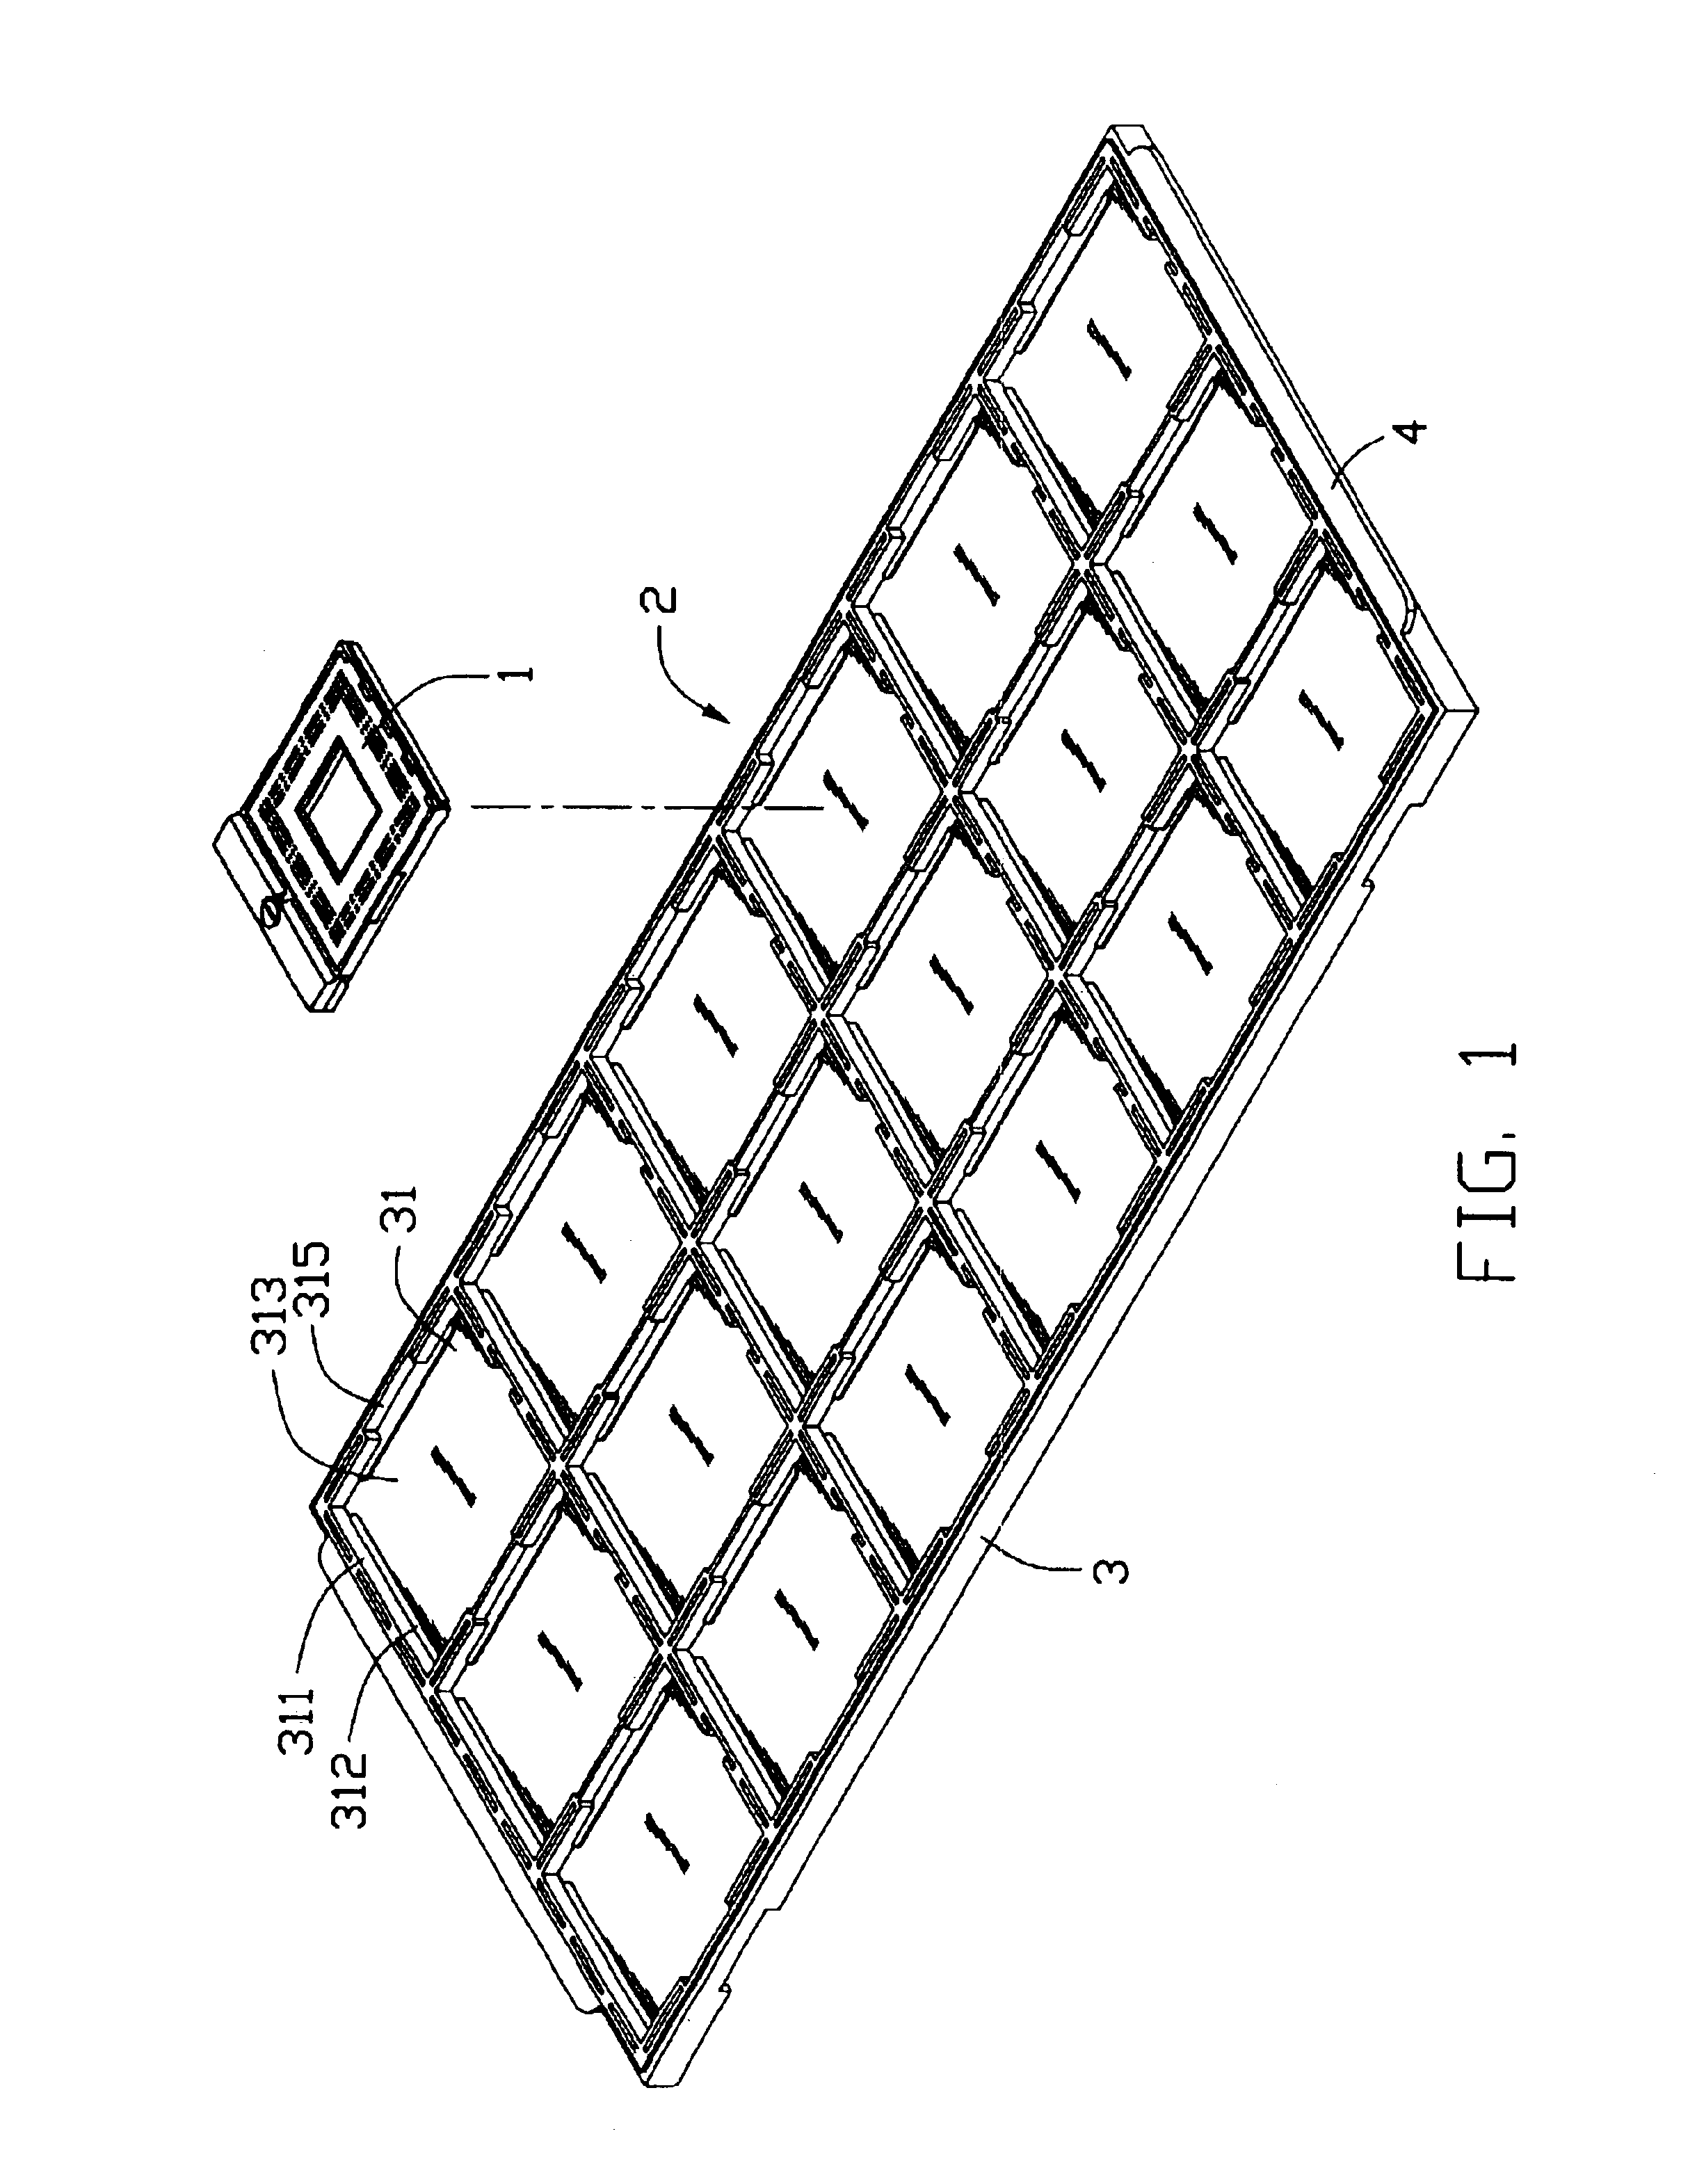 Connector packaging tray with supporting standoffs